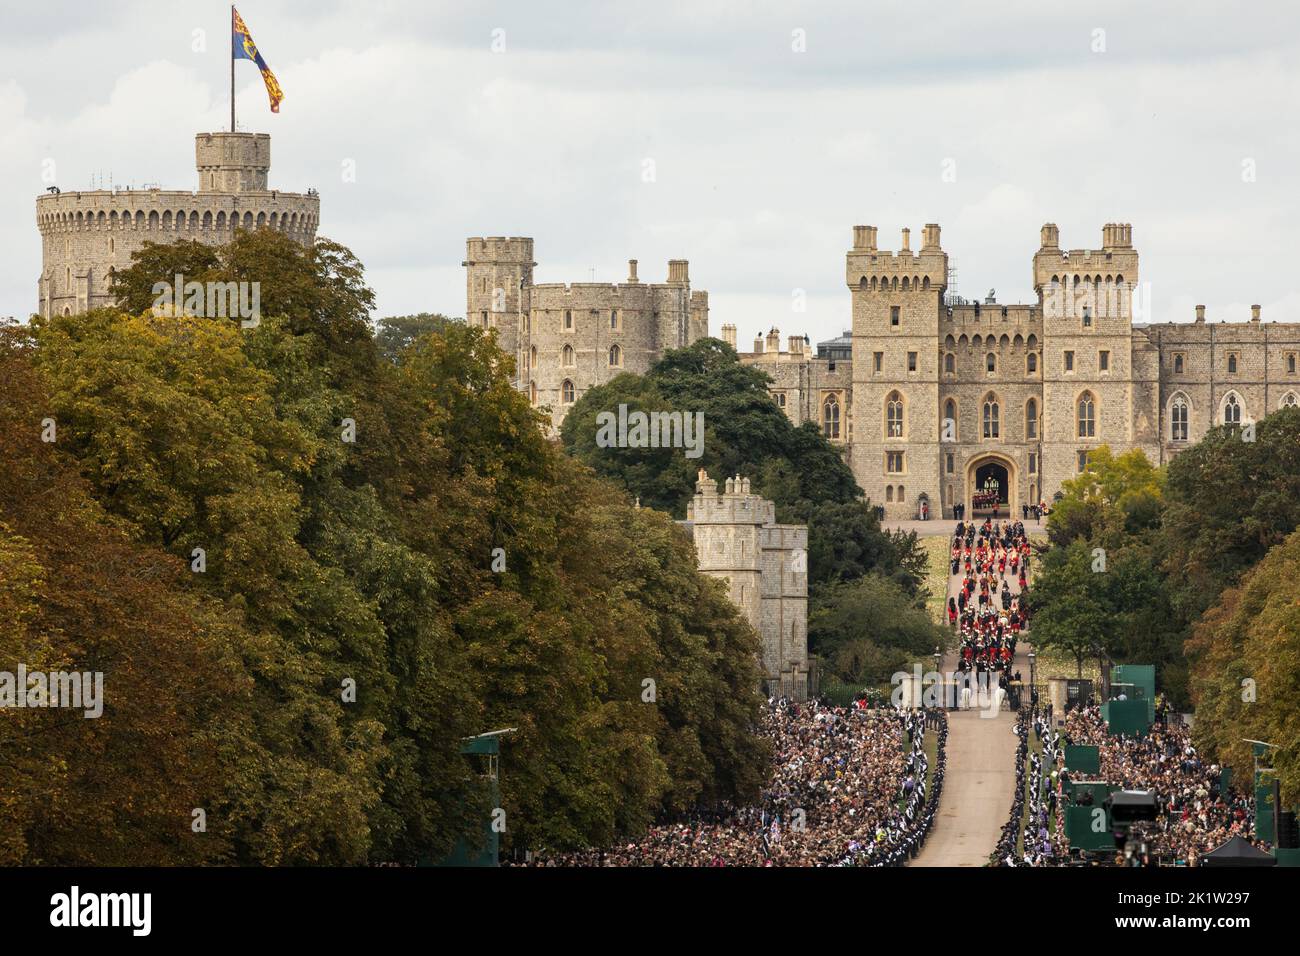 Windsor, UK. 19th September, 2022. Thousands of mourners line the Long Walk in Windsor Great Park to view the procession of Queen Elizabeth II's coffin carried in the State Hearse to St George’s Chapel for the Committal Service. Queen Elizabeth II, the UK's longest-serving monarch, died at Balmoral aged 96 on 8th September 2022 after a reign lasting 70 years. Credit: Mark Kerrison/Alamy Live News Stock Photo